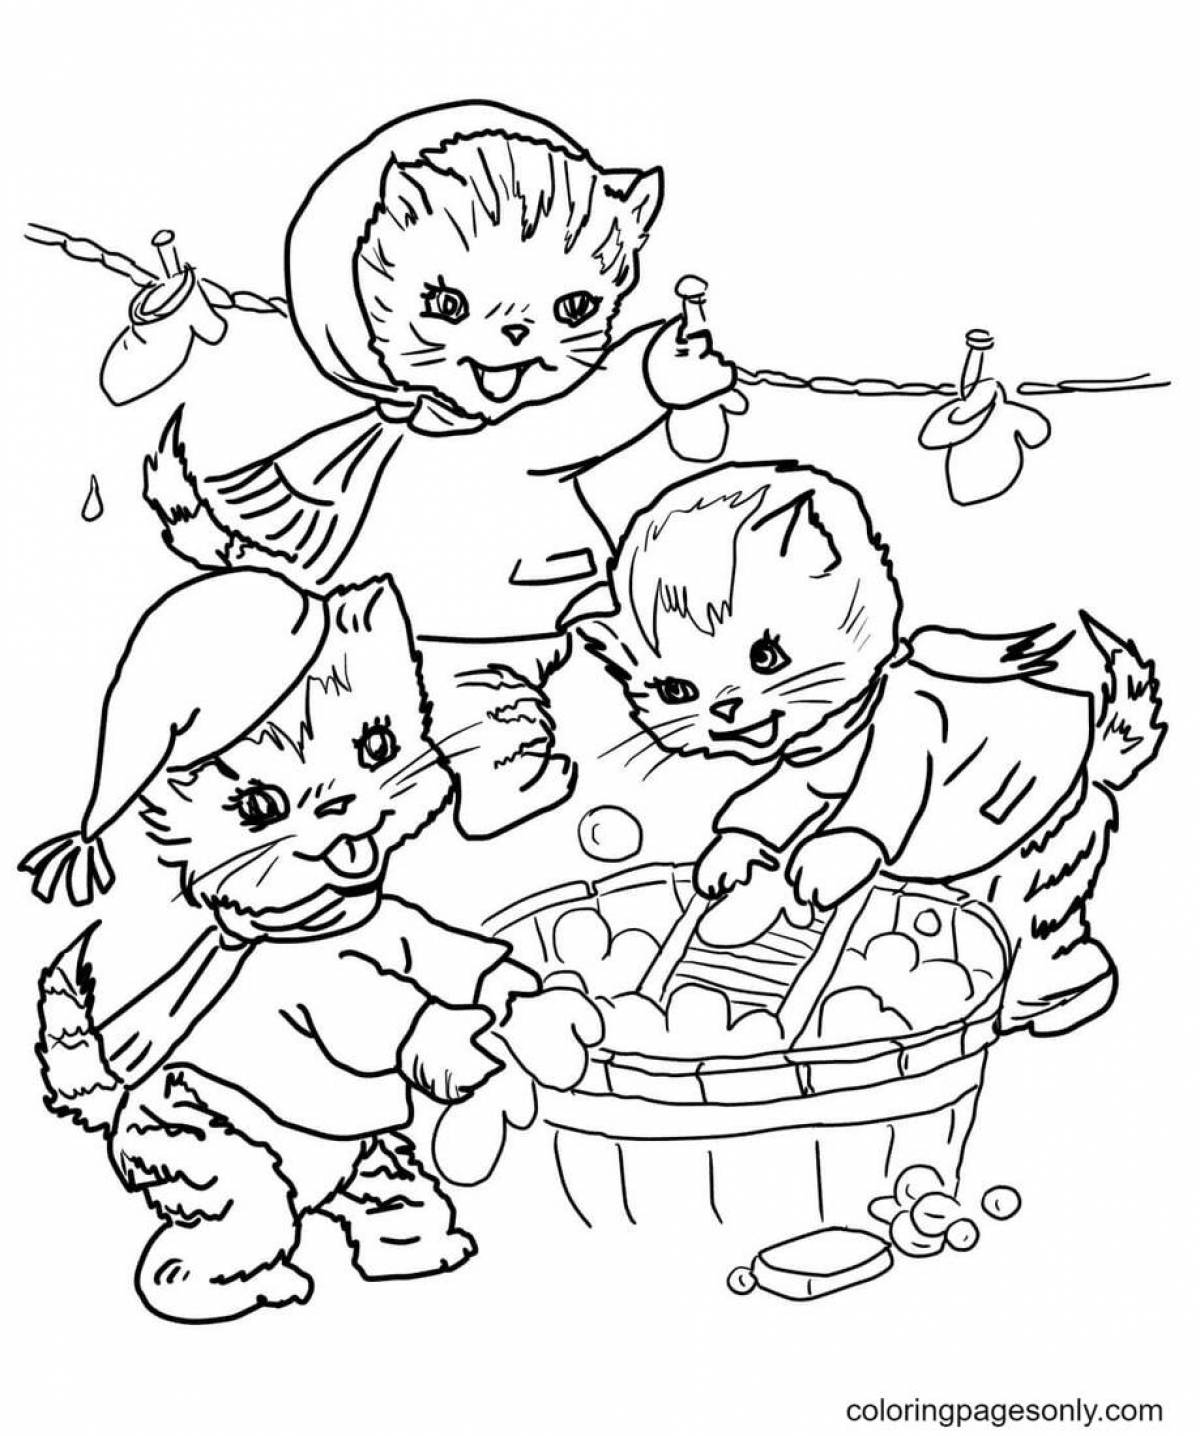 Bright three kittens coloring book